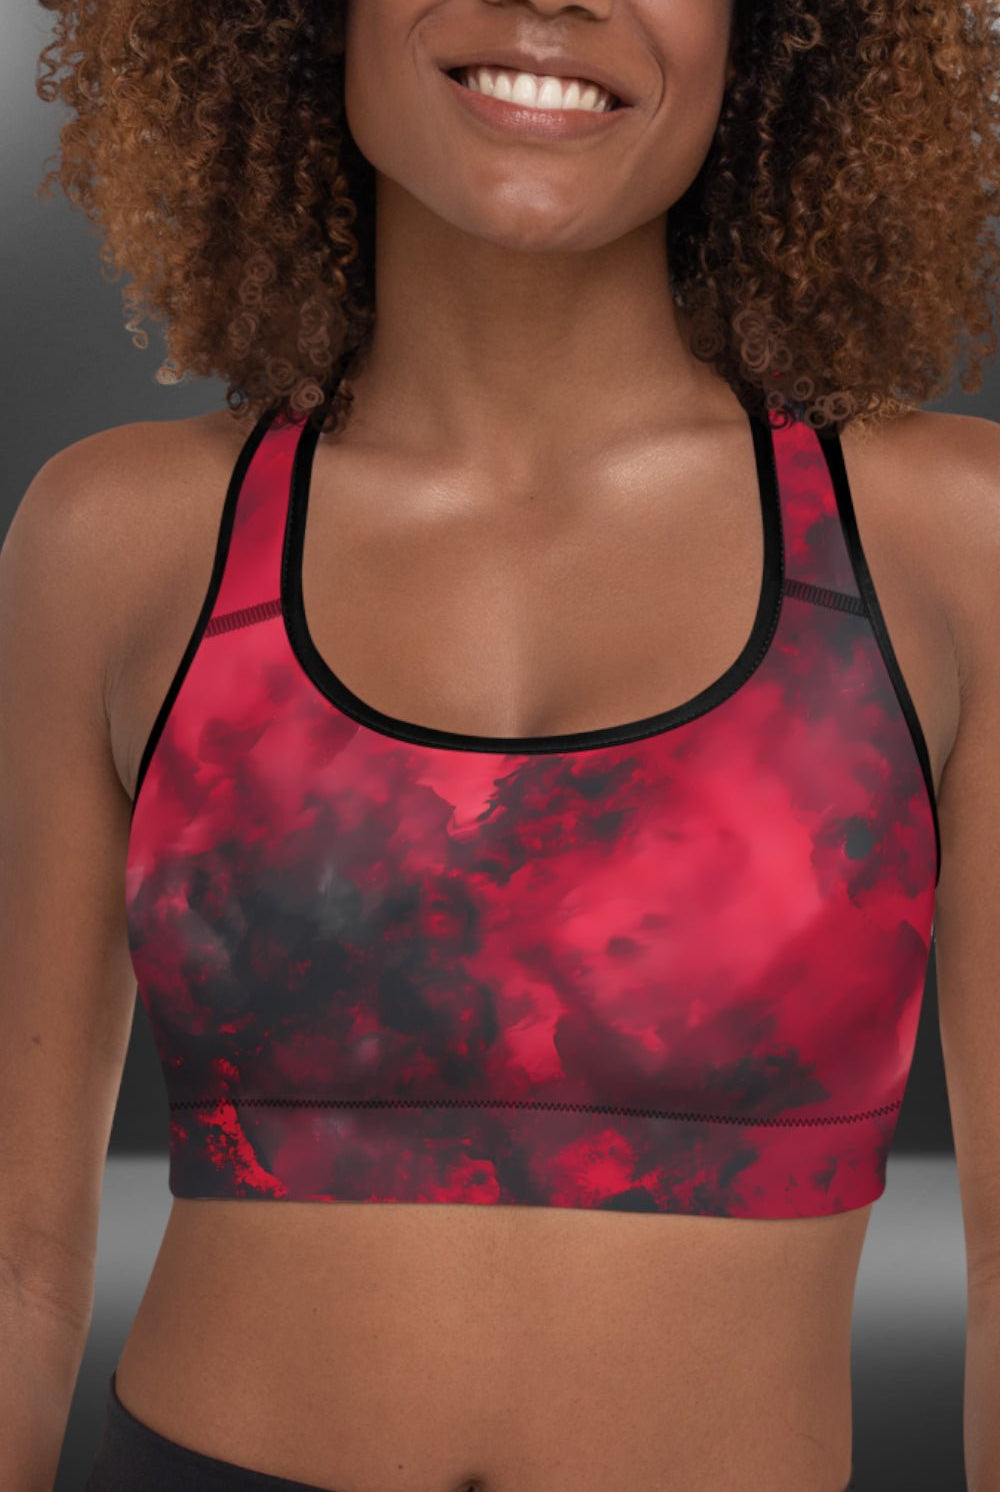 Dragon Foxx™ Red and Black Particle Grunge Padded Sports Bra - Dragon Foxx™ Padded Sports Bra - DRAGON FOXX™ - Dragon Foxx™ Red and Black Particle Grunge Padded Sports Bra - 6390448_10862 - XS - Red / Black - Dragon Foxx™ - Dragon Foxx™ Padded Sports Bra - Dragon Foxx™ Red and Black Grunge Padded Sports Bra